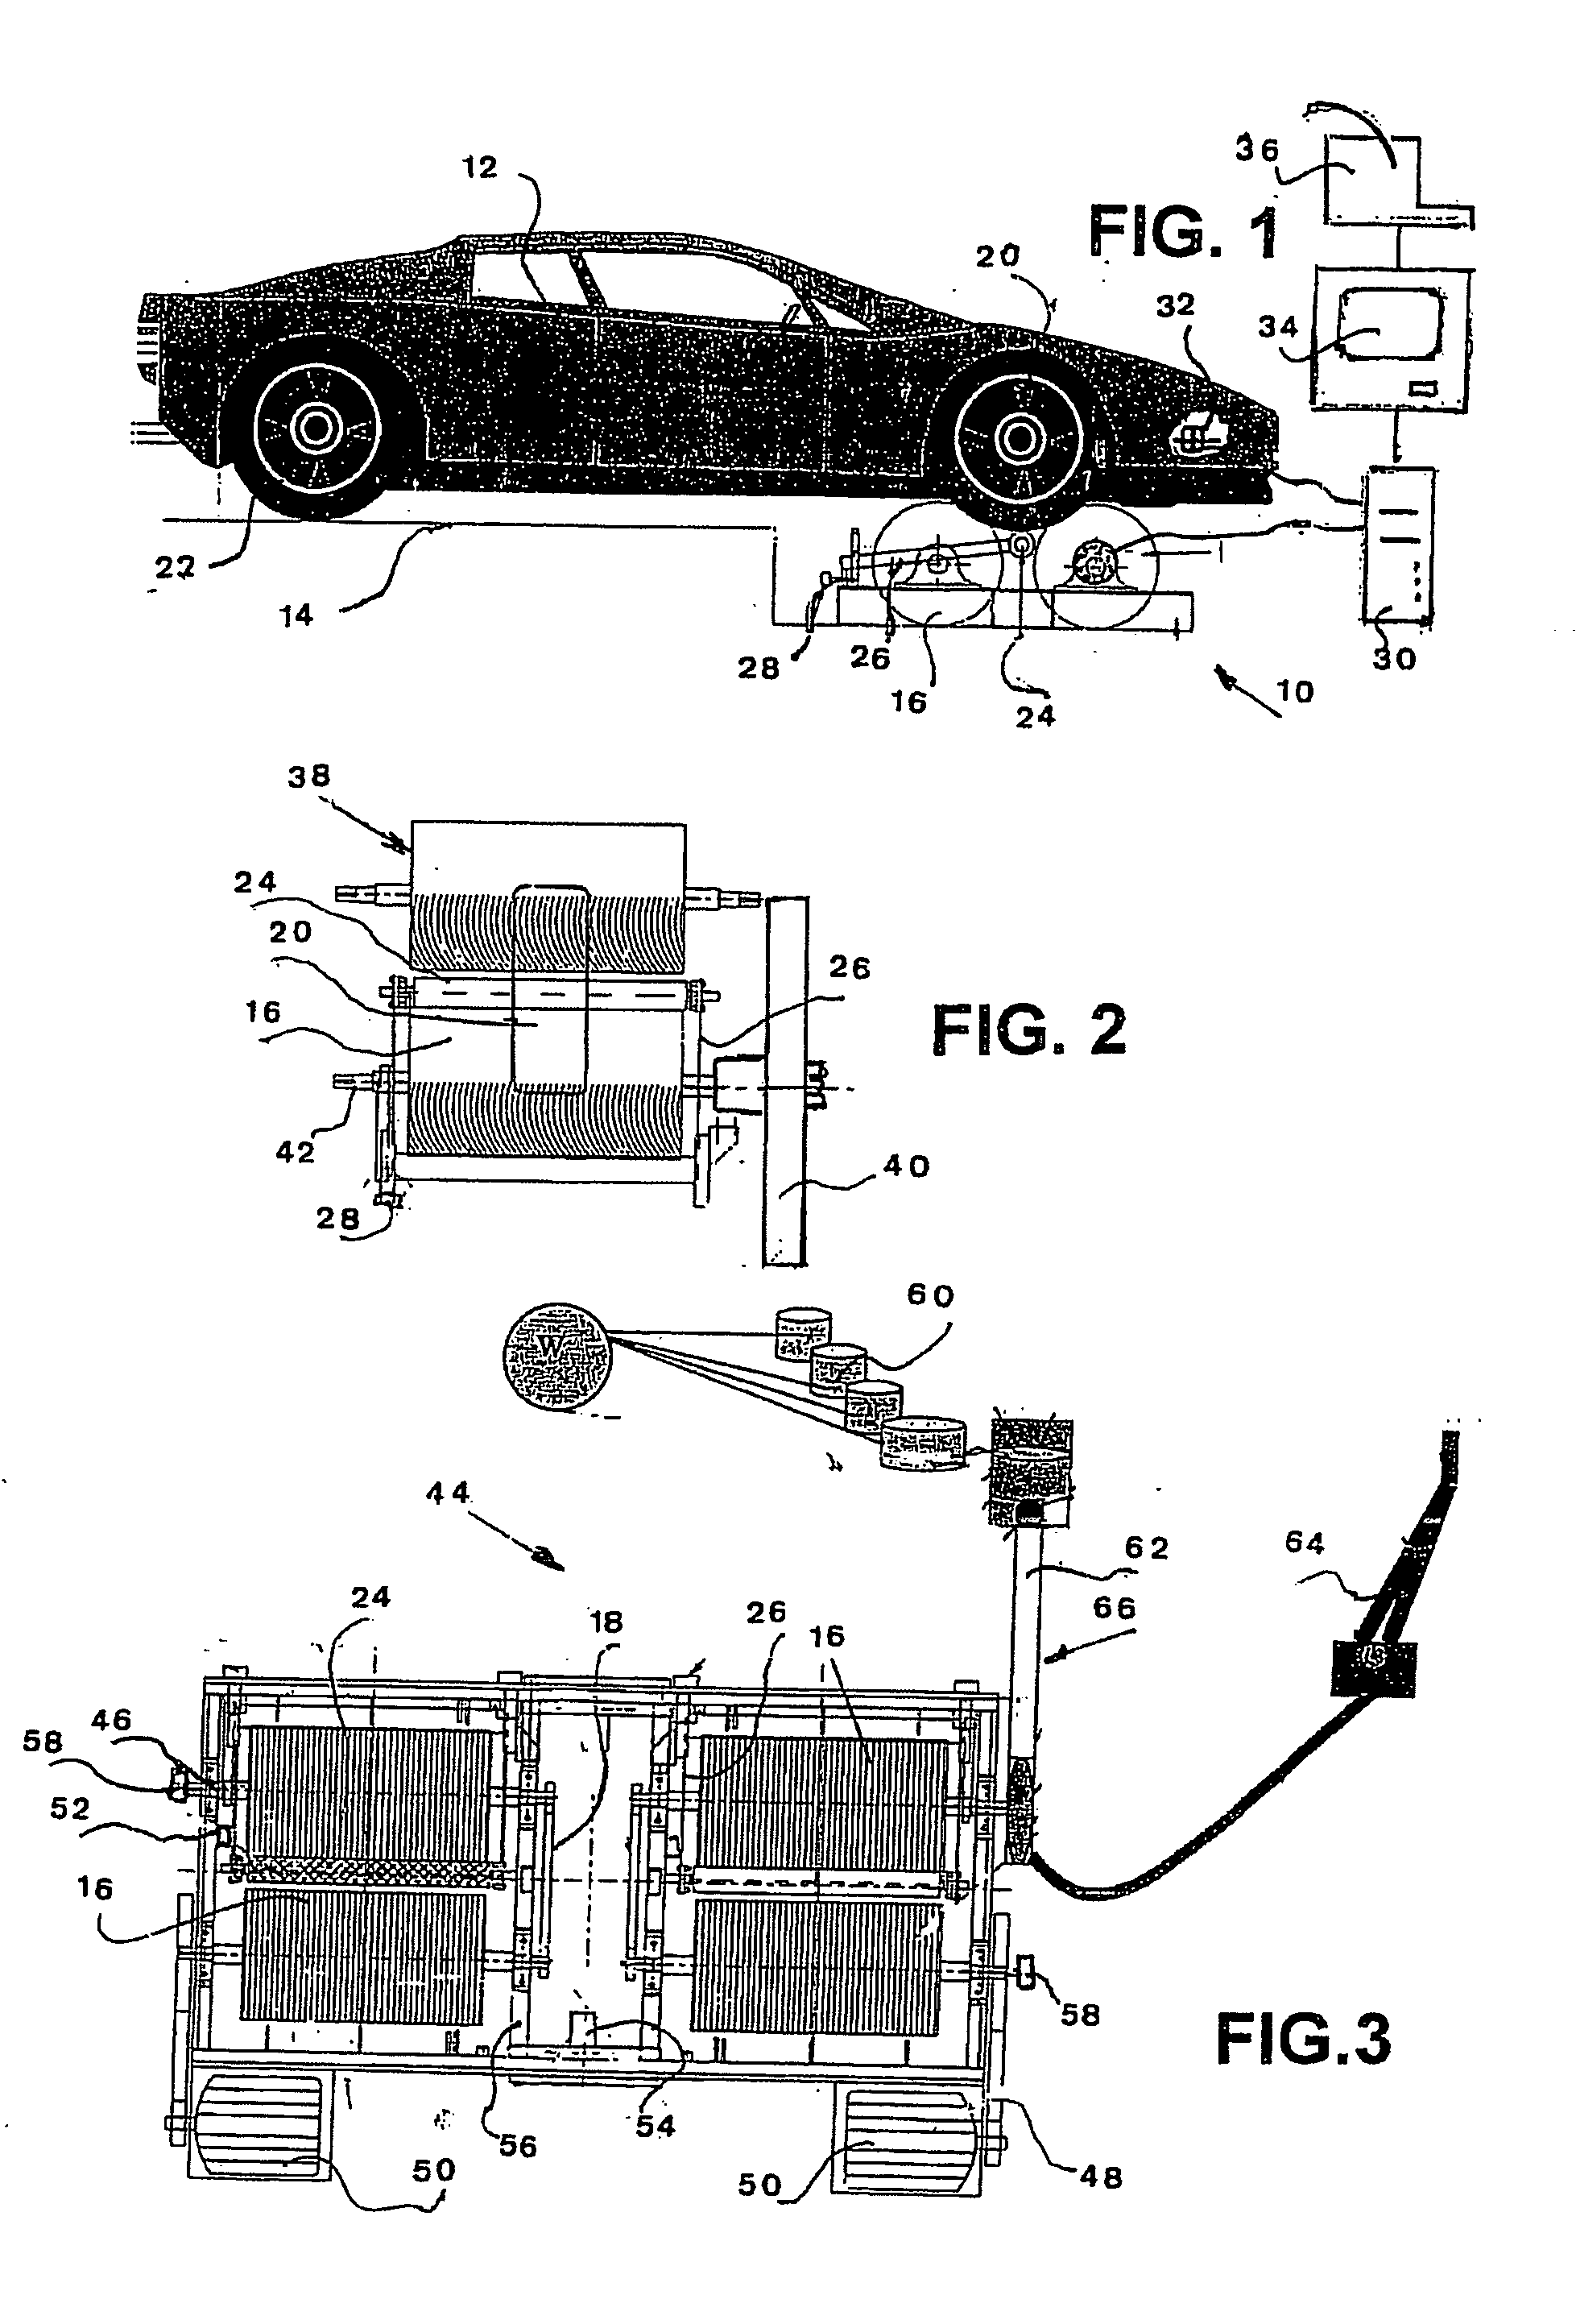 Apparatus and method for testing the performance of a vehicle